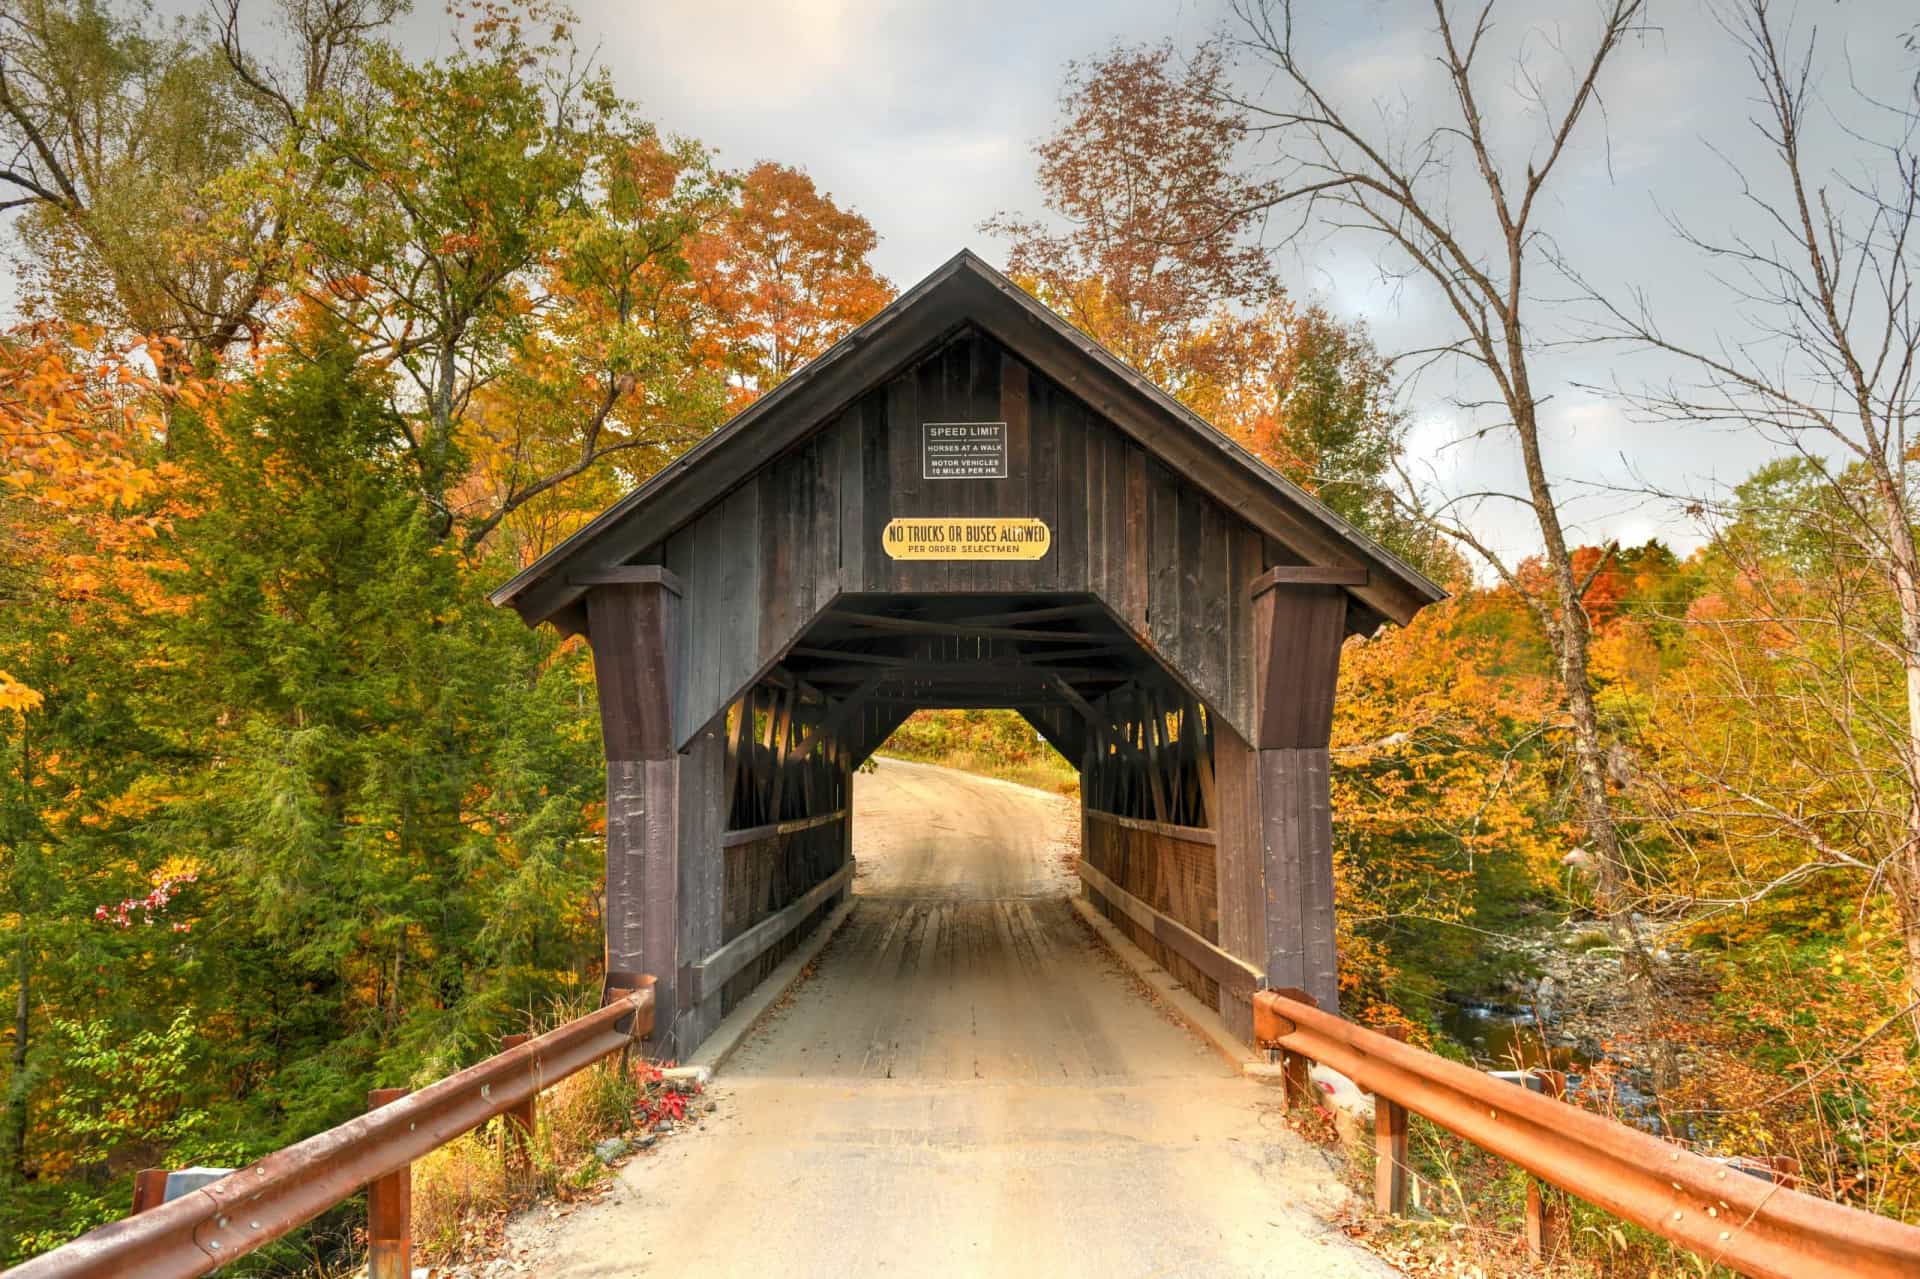 <p>This bridge on Covered Bridge Road, in Stowe, is Vermont's most haunted location. The bridge is also known as Emily's Bridge, as according to one version of a story, a teenage girl took her own life there in the 1920s. From a woman's voice to orbs and strange lights, a wide range of paranormal activity has been reported.</p>